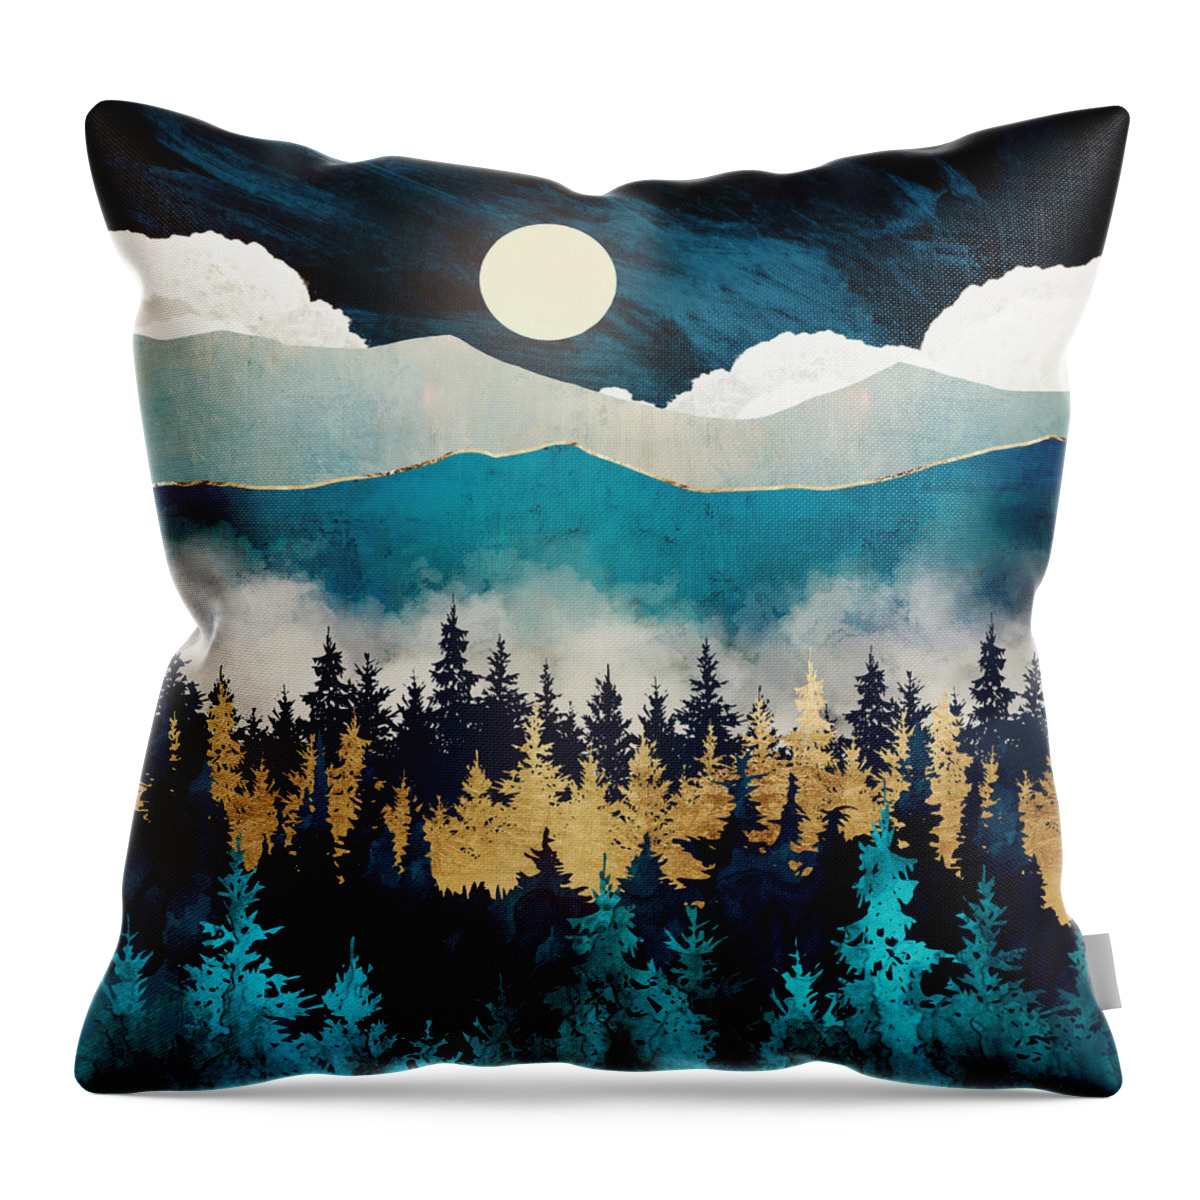 Mist Throw Pillow featuring the digital art Evening Mist by Spacefrog Designs